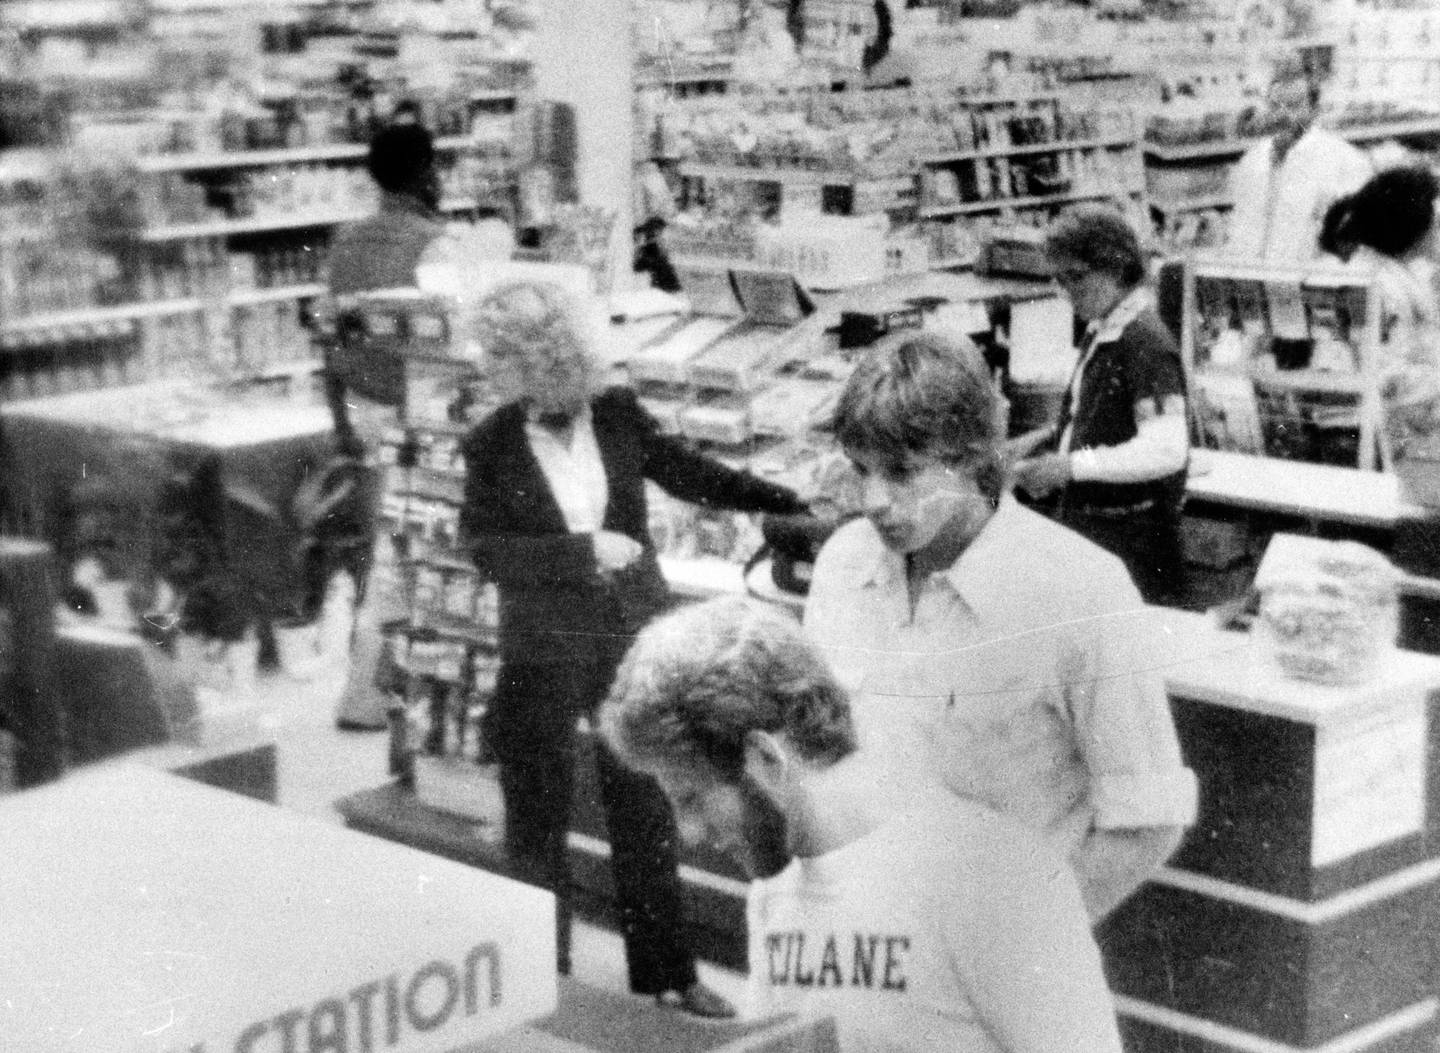 A still from a drugstore camera shows Paula Prince, center in suit, as she buys a bottle of tainted Tylenol in 1982 at the Walgreens near her home in Chicago.